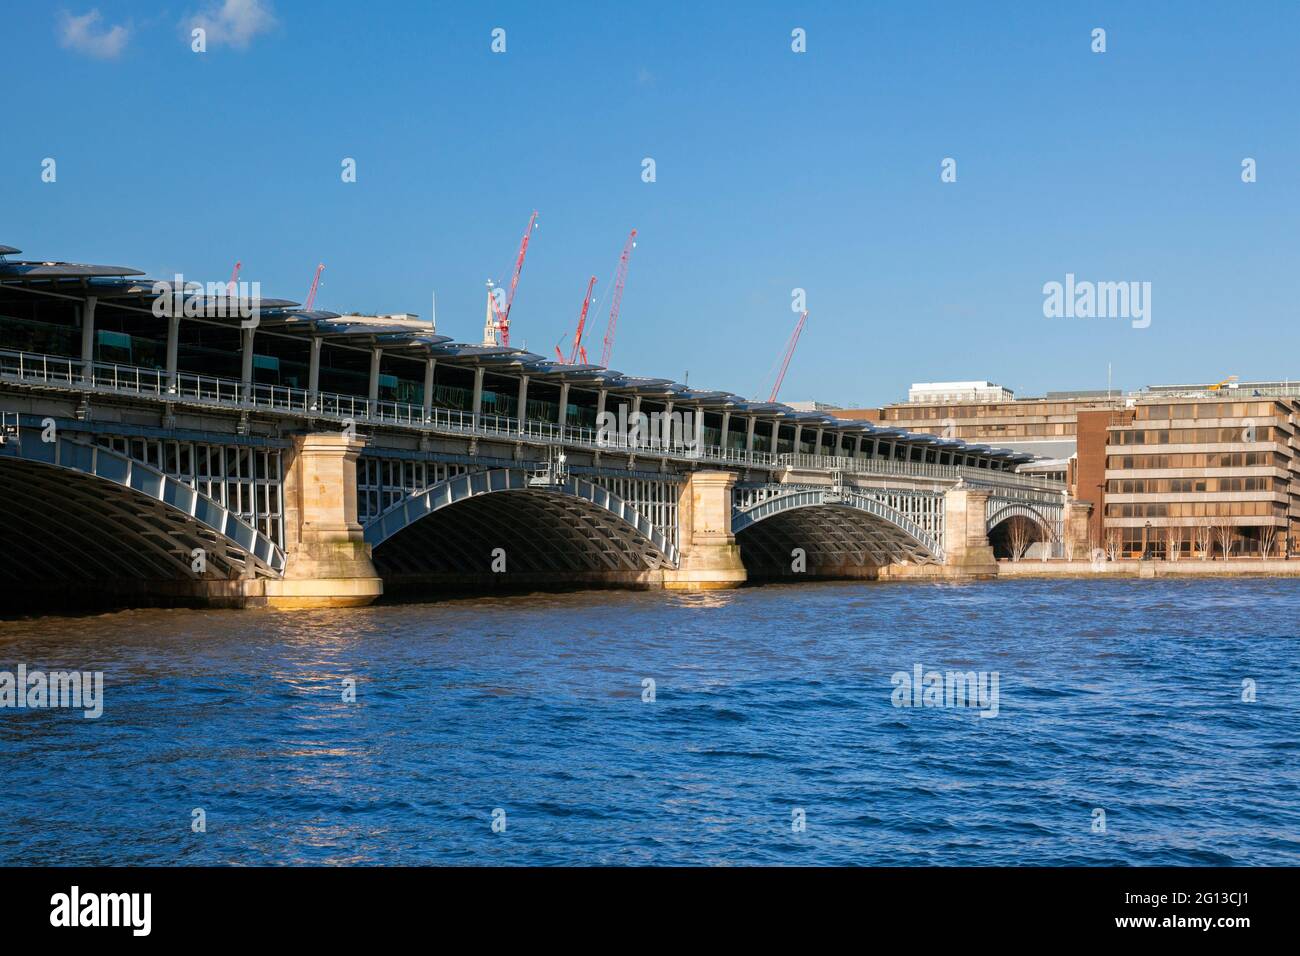 UK, England, London, Blackfriars Railway Station supported above the River Thames. Stock Photo